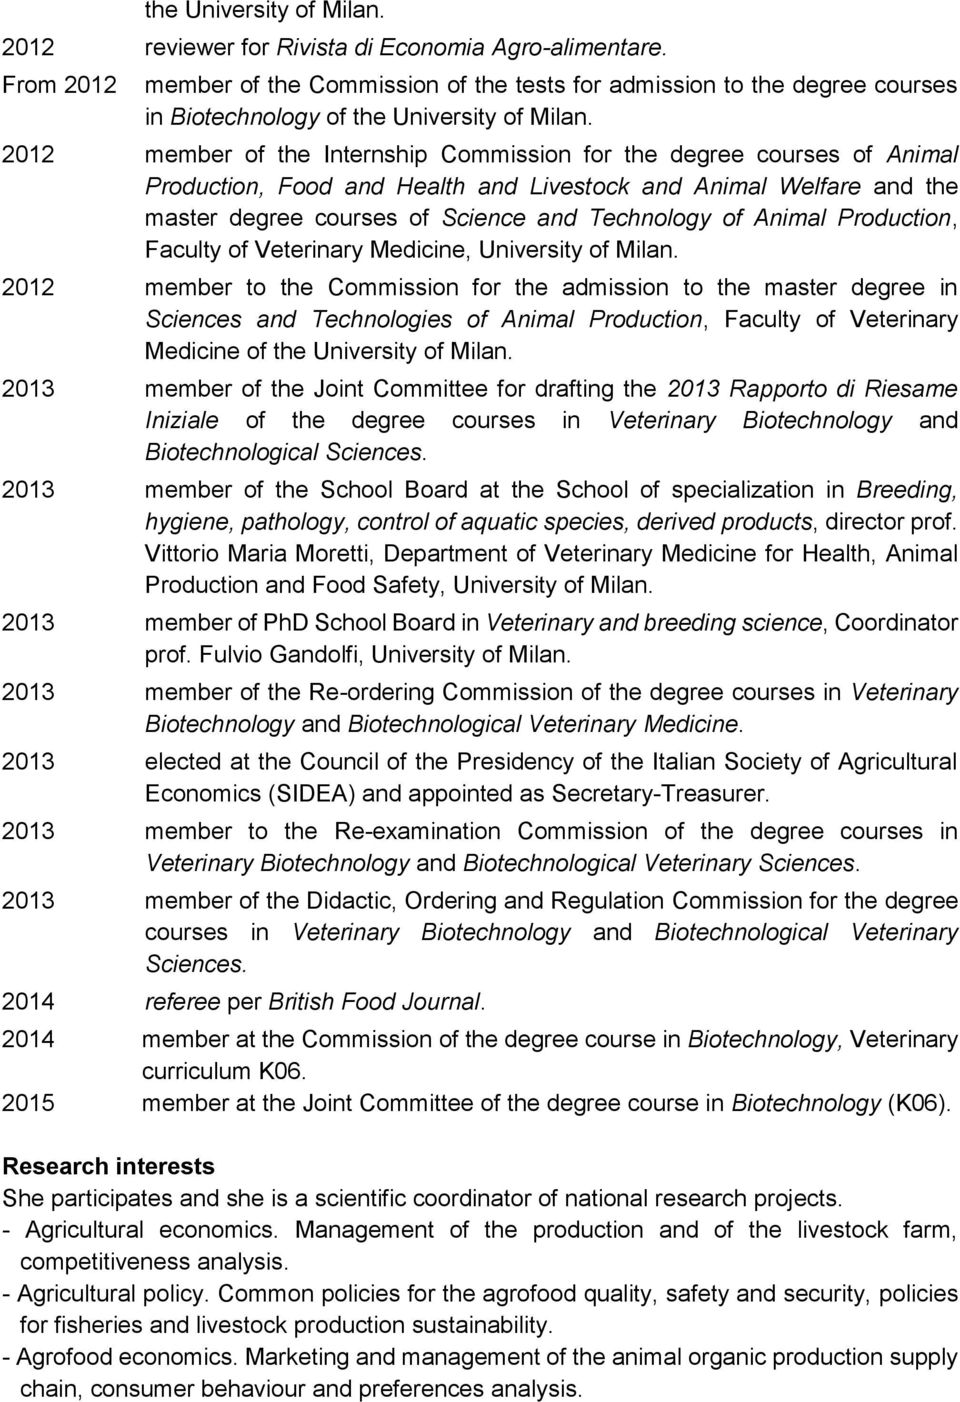 2012 member of the Internship Commission for the degree courses of Animal Production, Food and Health and Livestock and Animal Welfare and the master degree courses of Science and Technology of